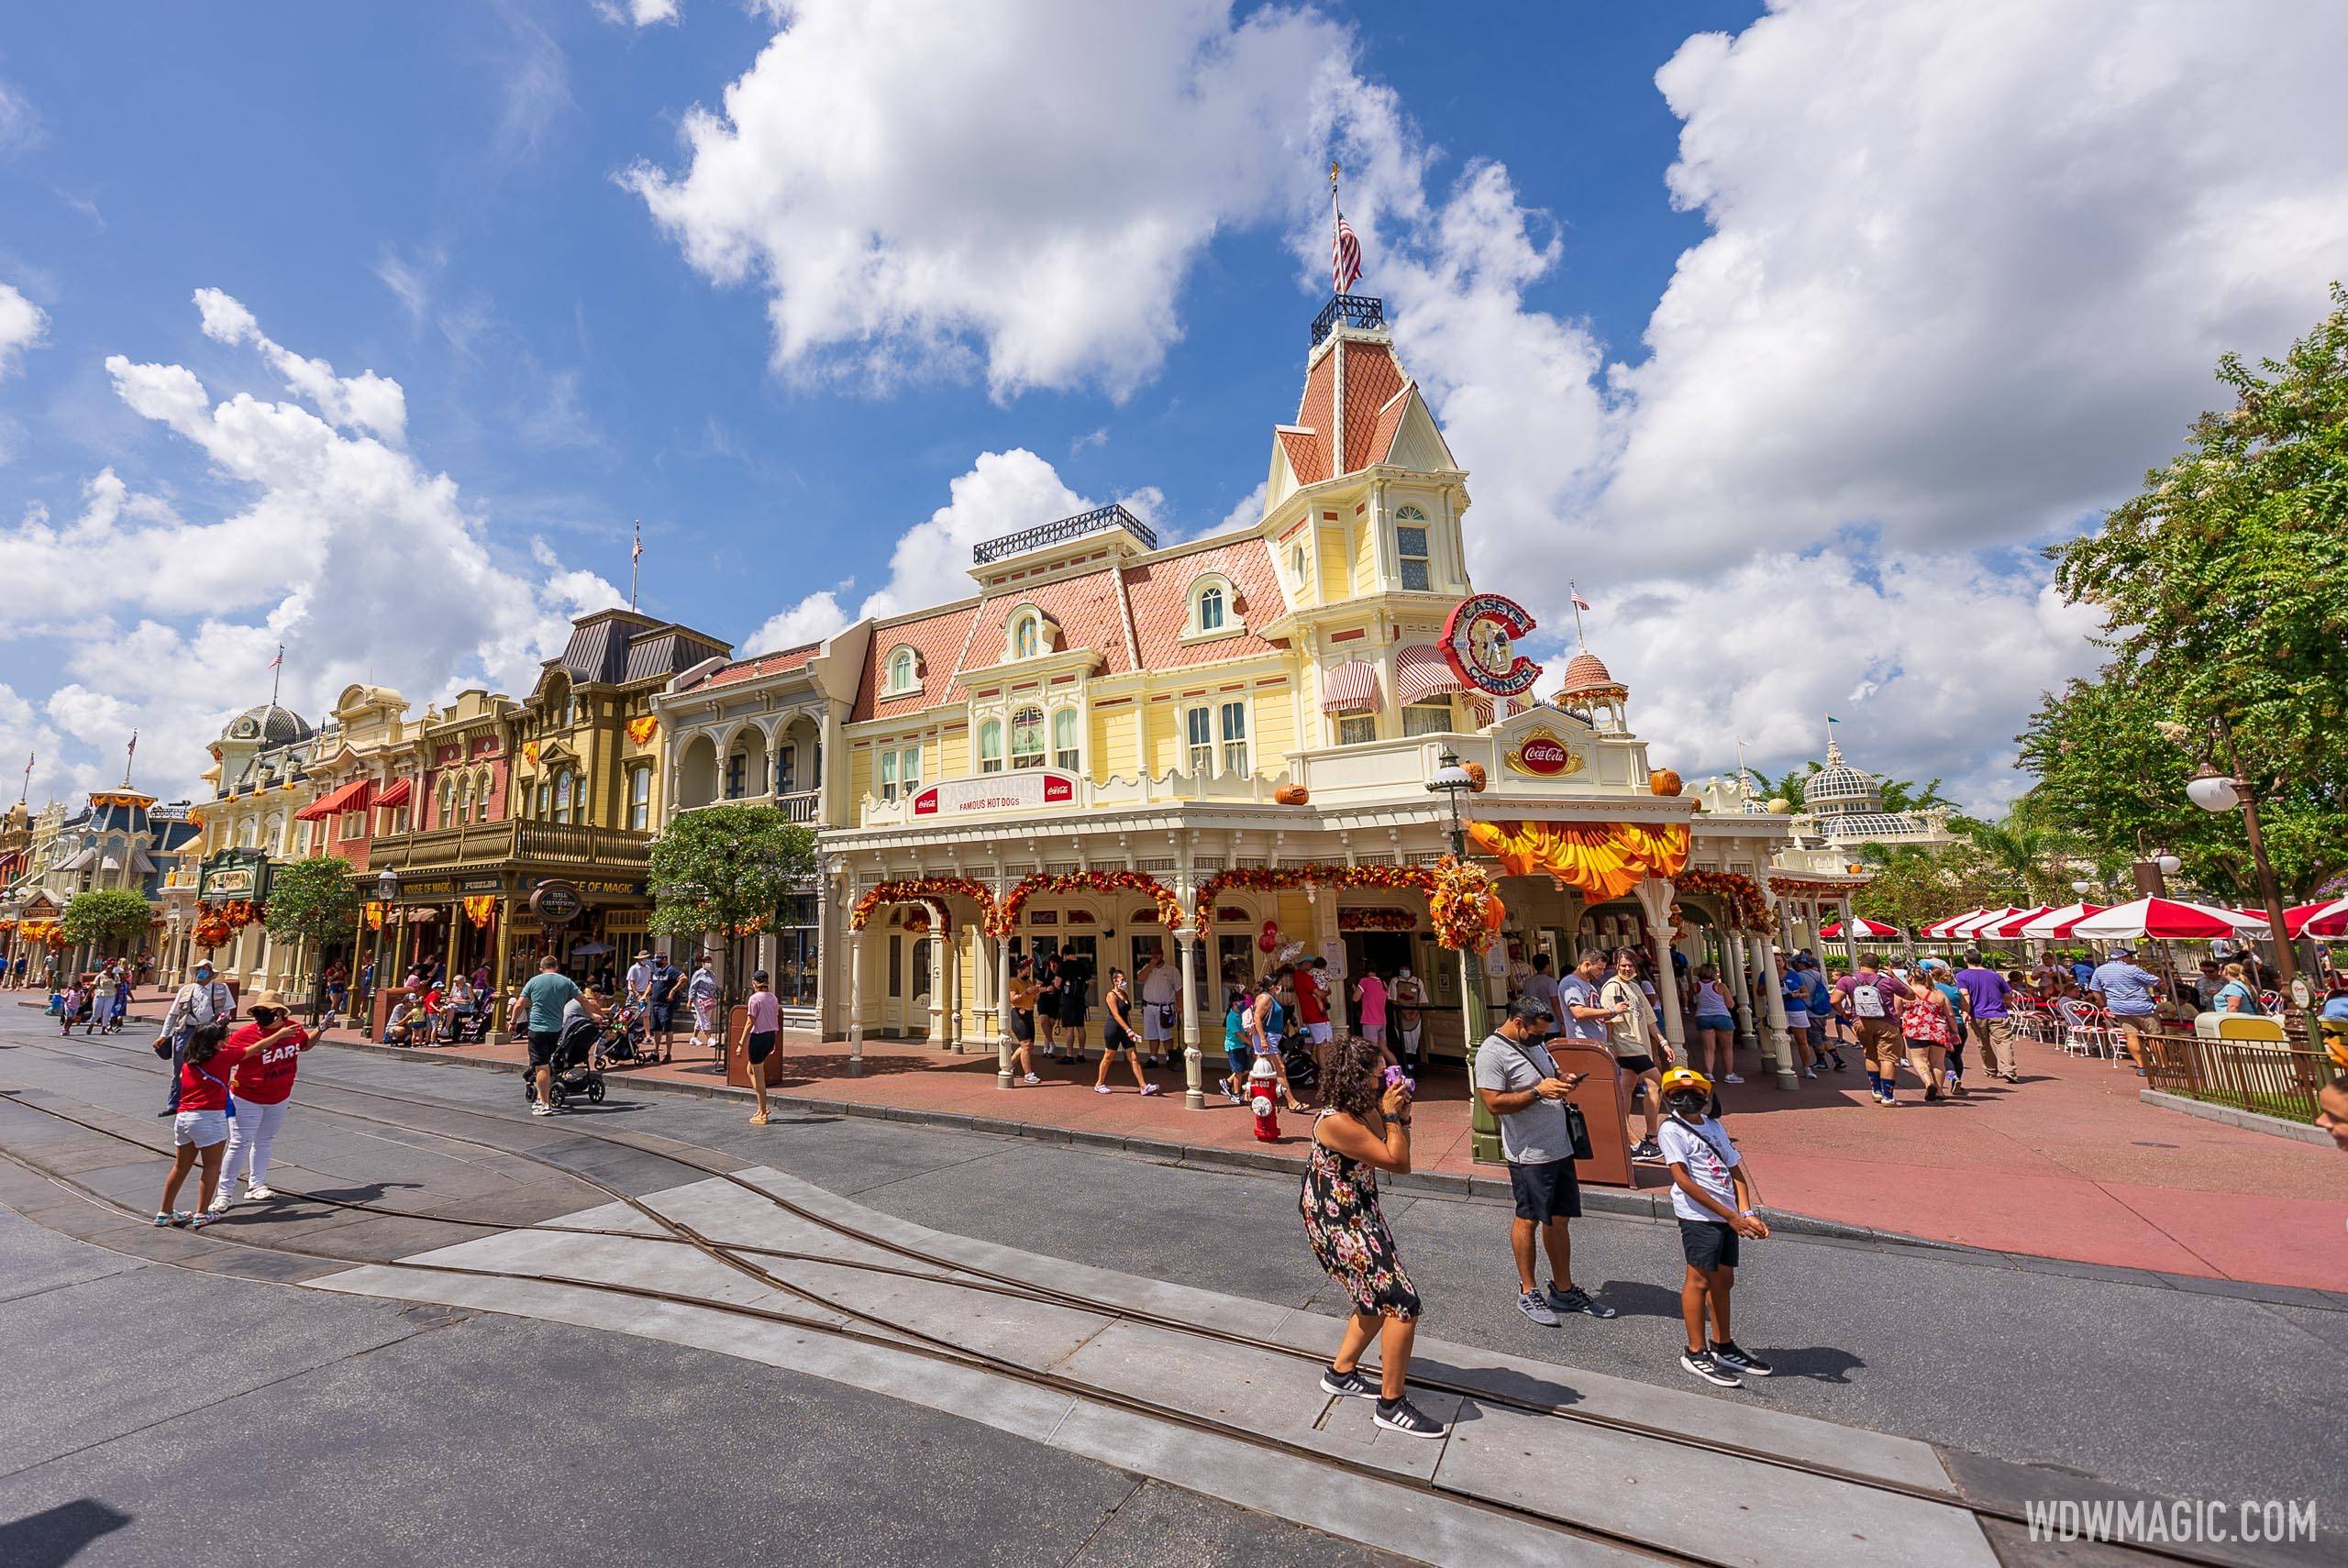 The buildings along Main Street U.S.A. house new projection systems